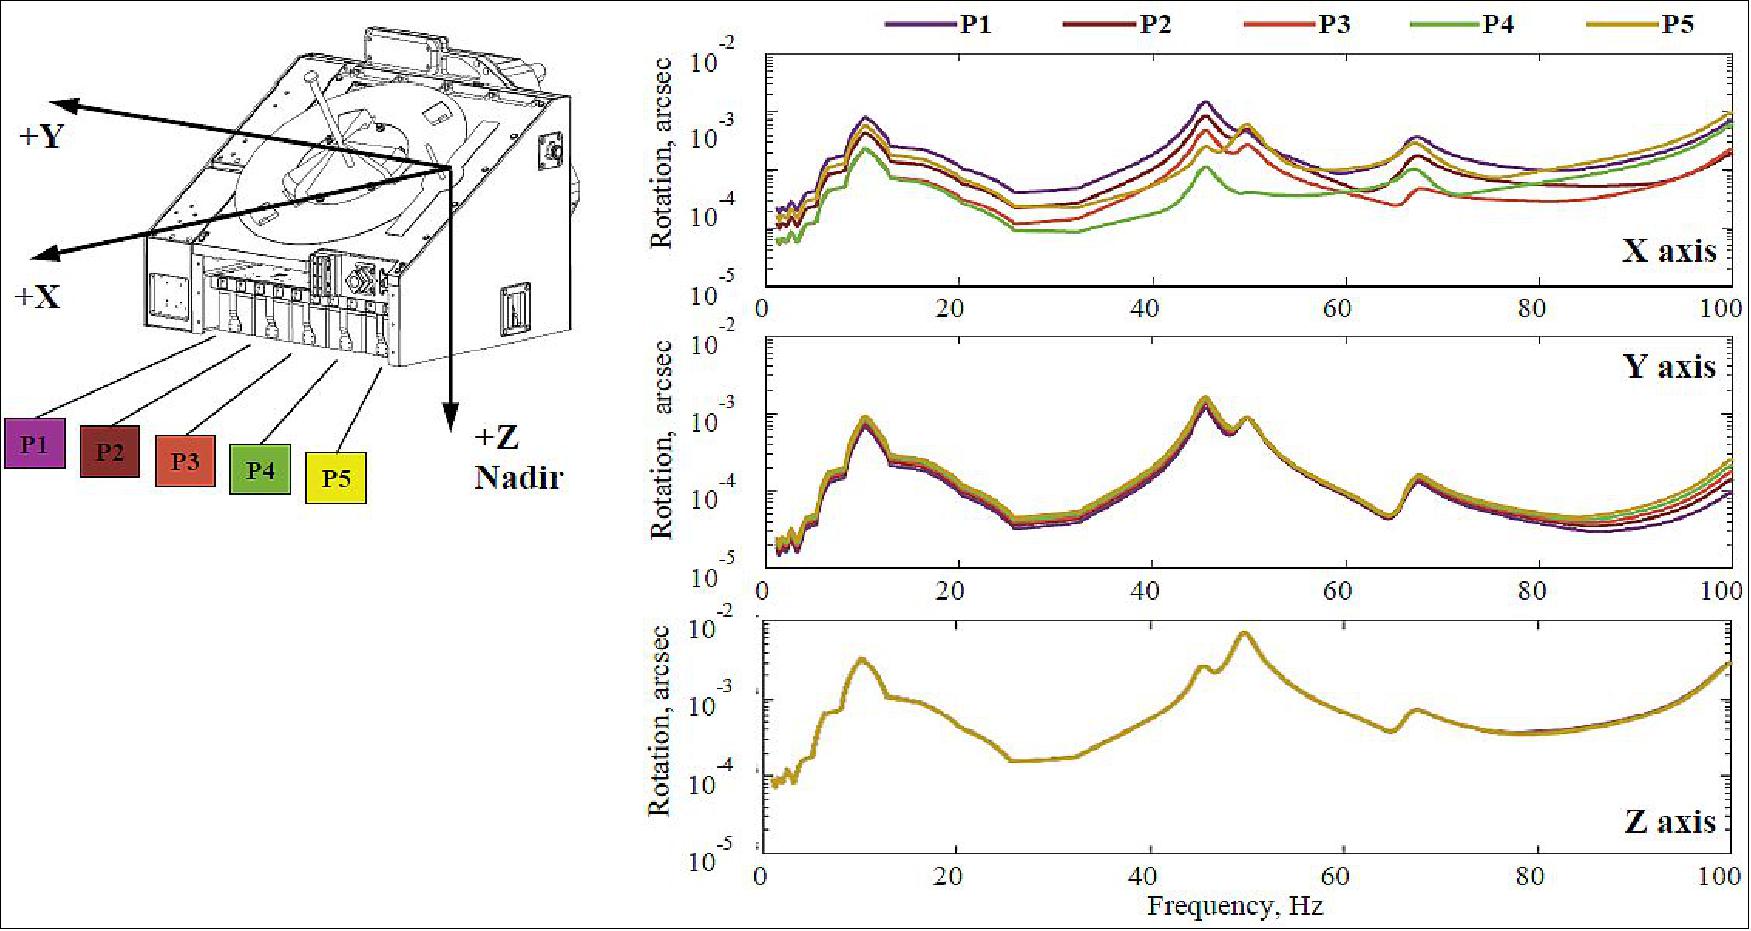 Figure 15: Frequency response in the rotational degree of freedom for the fully occupied EPP installed on the JEM-EF (image credit: JAXA, NanoRacks)